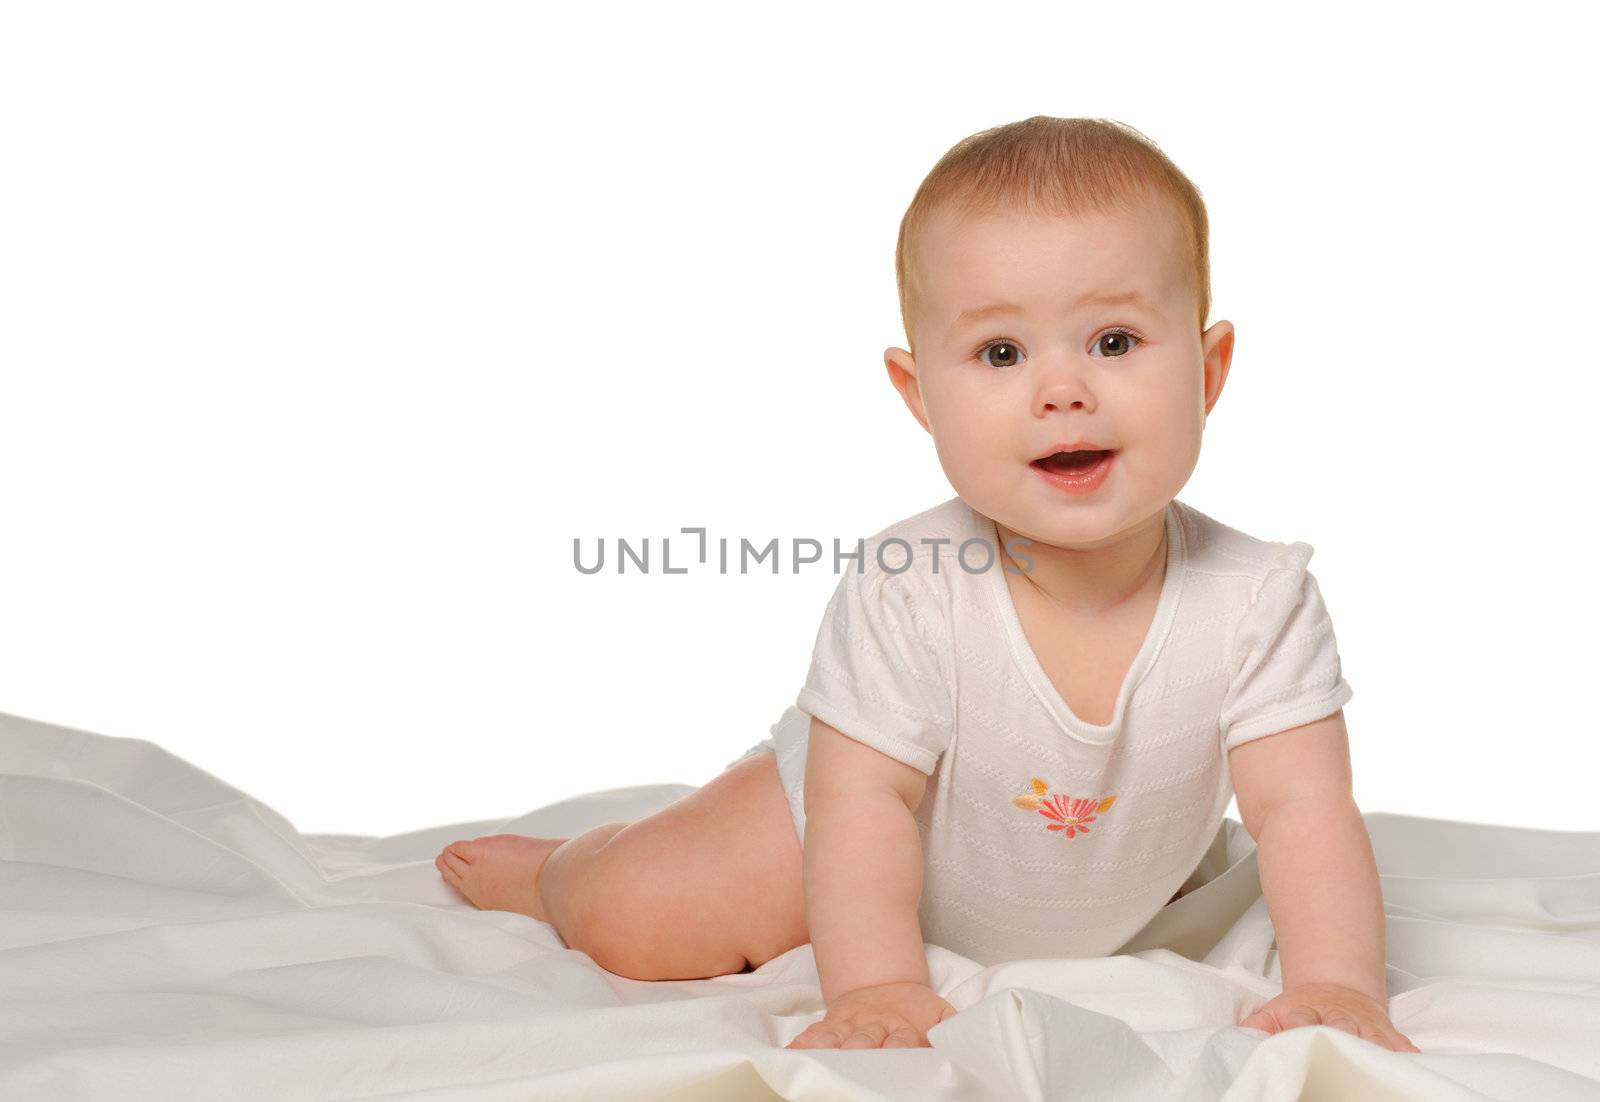 The baby on a bedsheet by galdzer